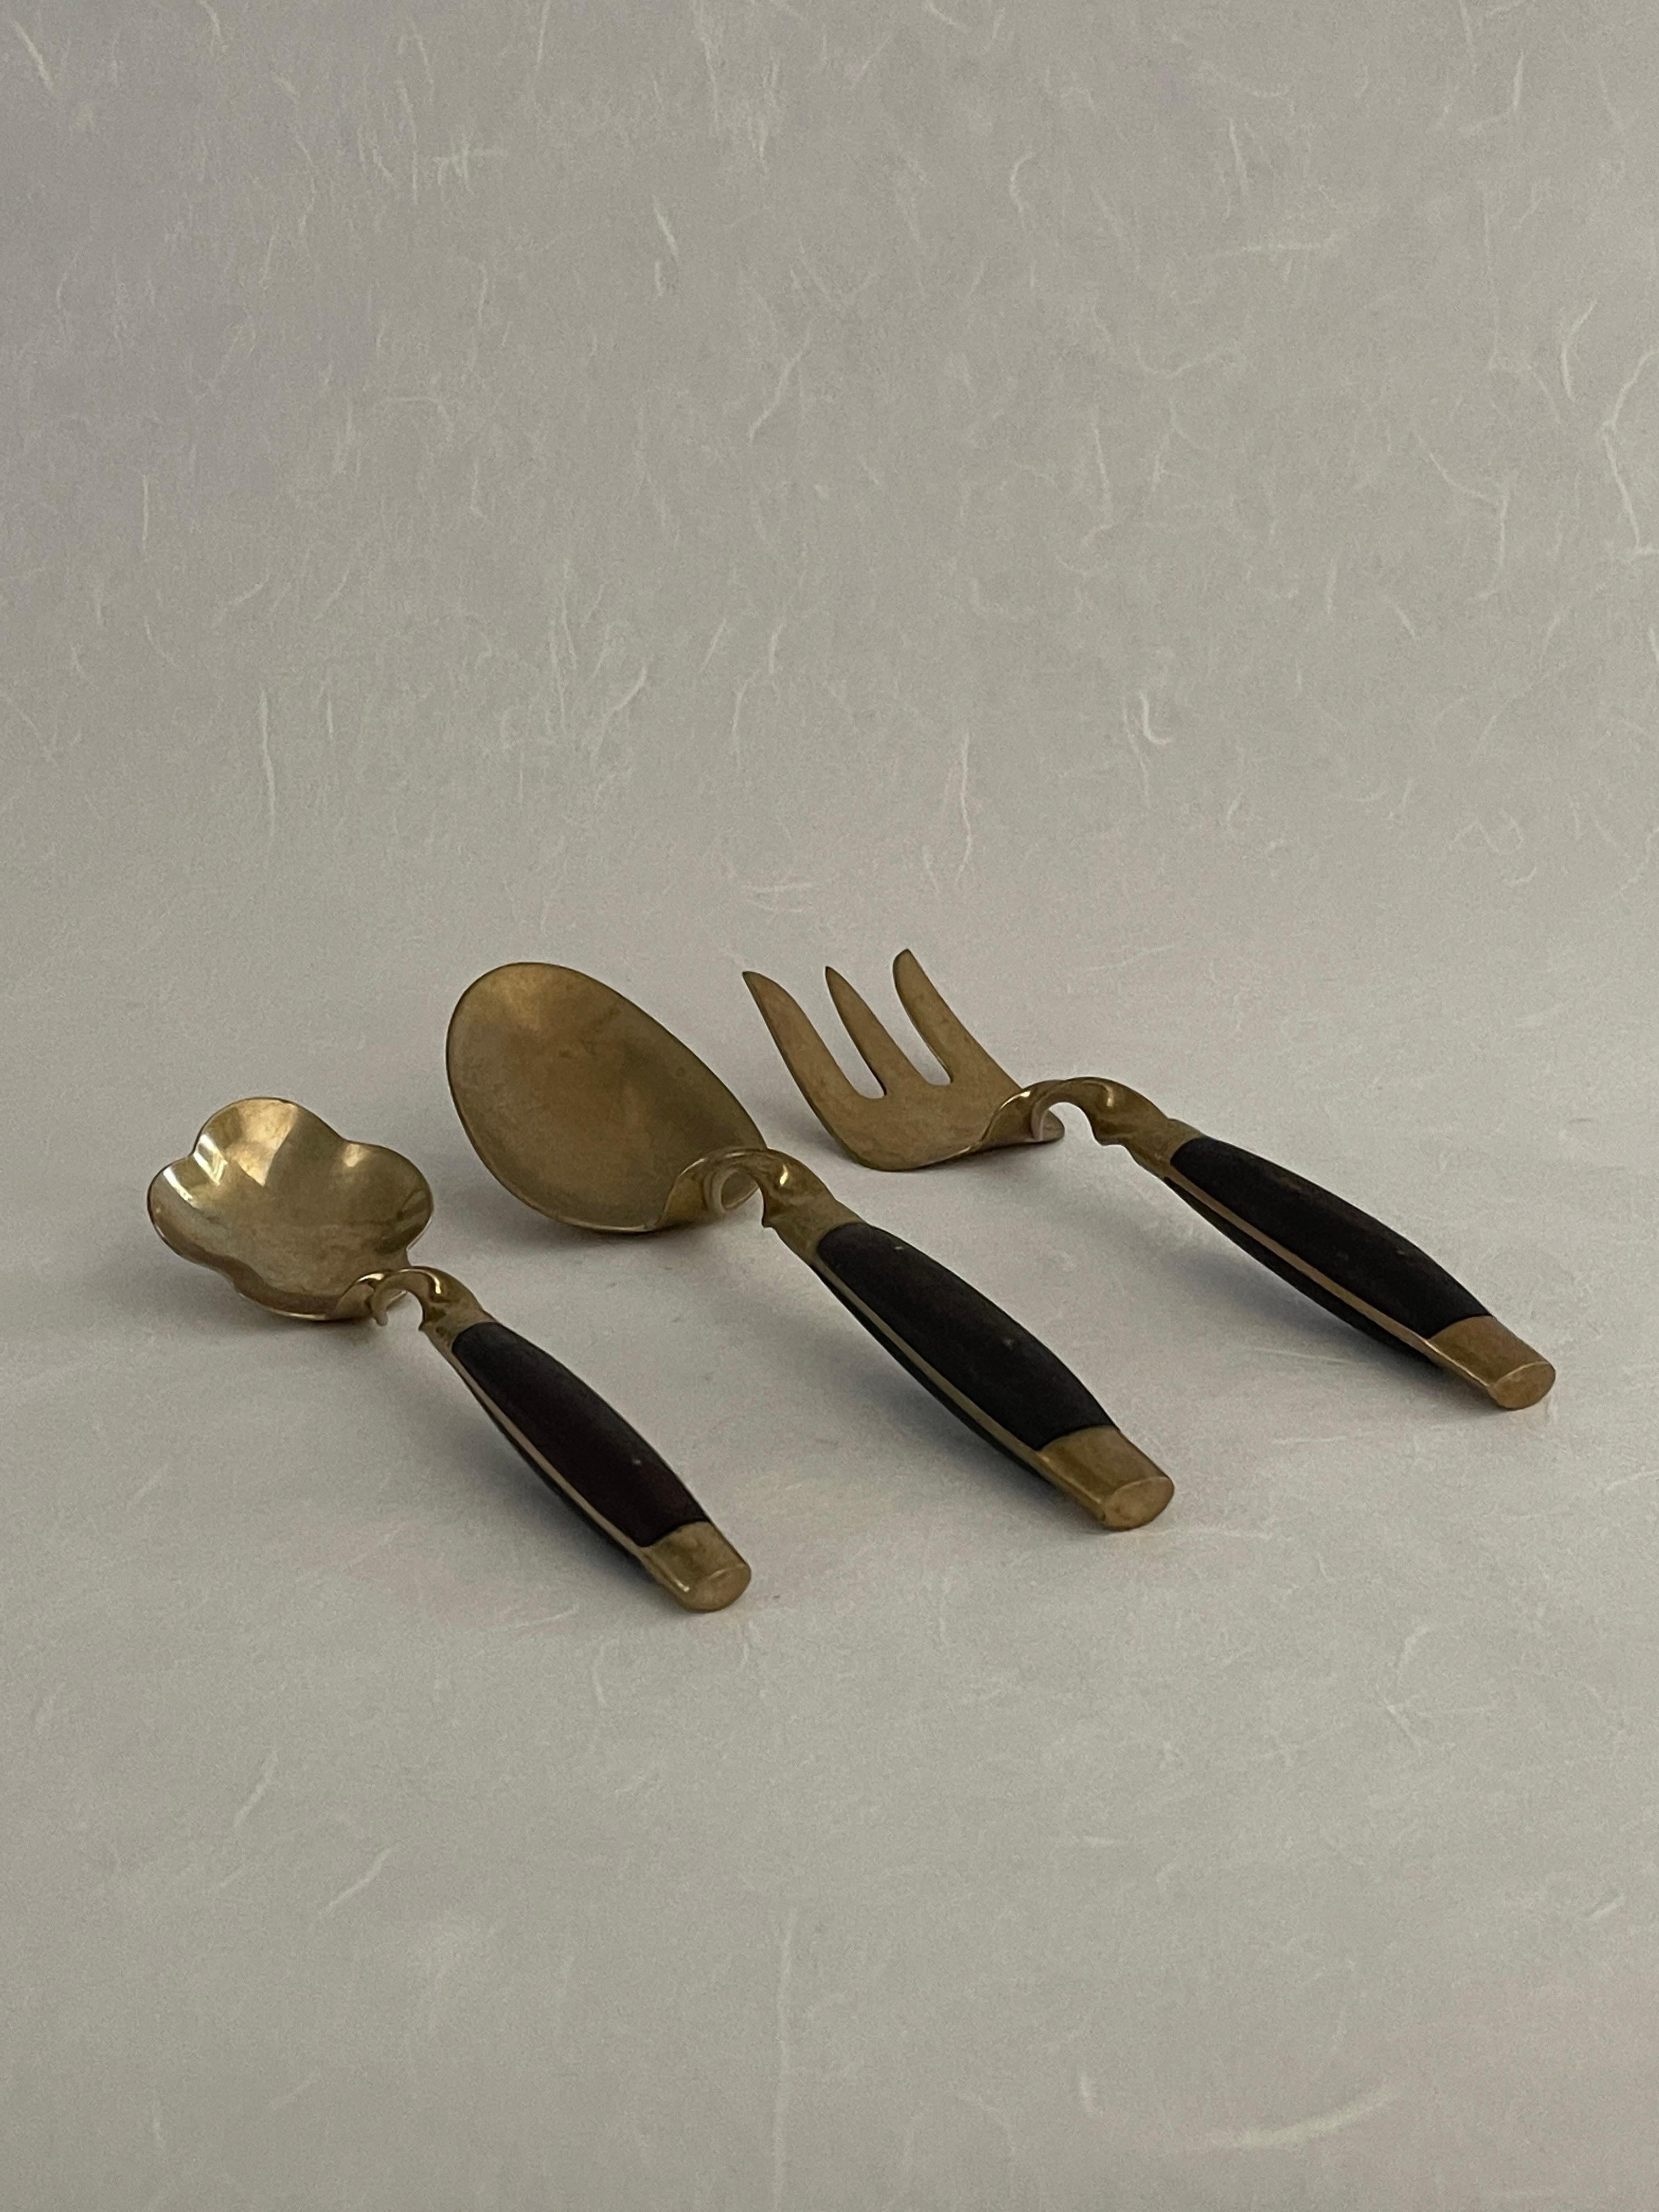 Mid-20th century 42-piece brass and rosewood flatware set. Insanely beautiful 42-piece mid-century brass and rosewood flatware set for a setting of 6. Including 2 butter knives, 1 small serving fork, and 4 large serving utensils. Missing 1 small